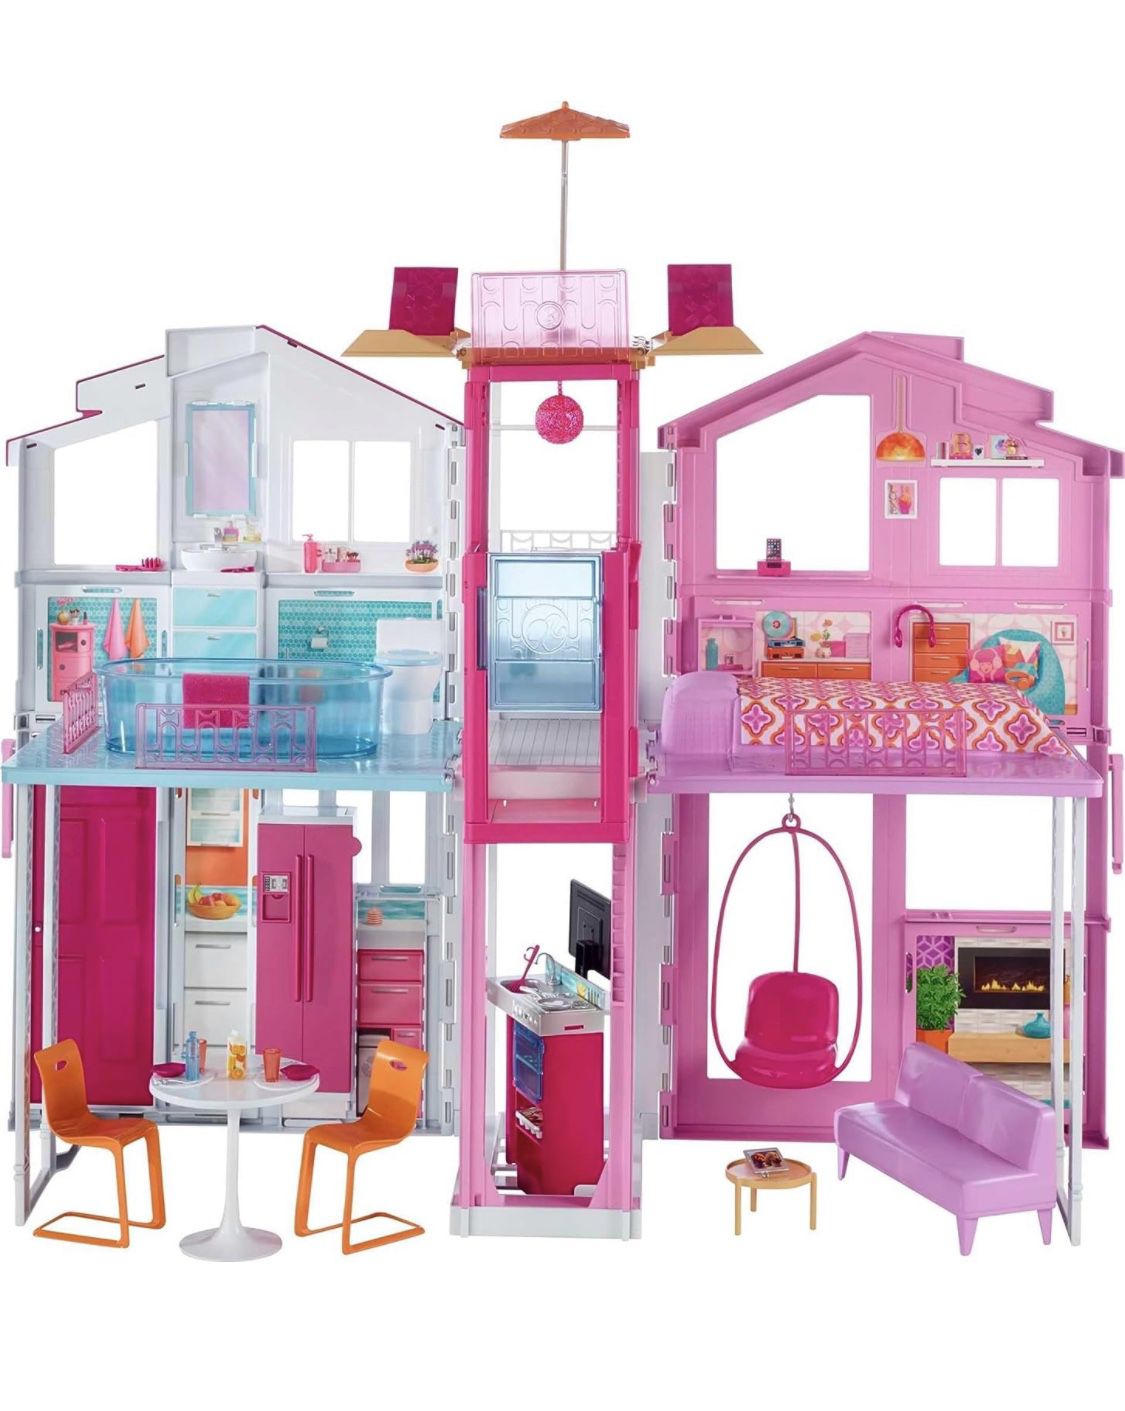 Barbie 3-Story Townhouse Dollhouse with Elevator, Swing Chair, Furniture and Accessories, Fold for Portability and Travel